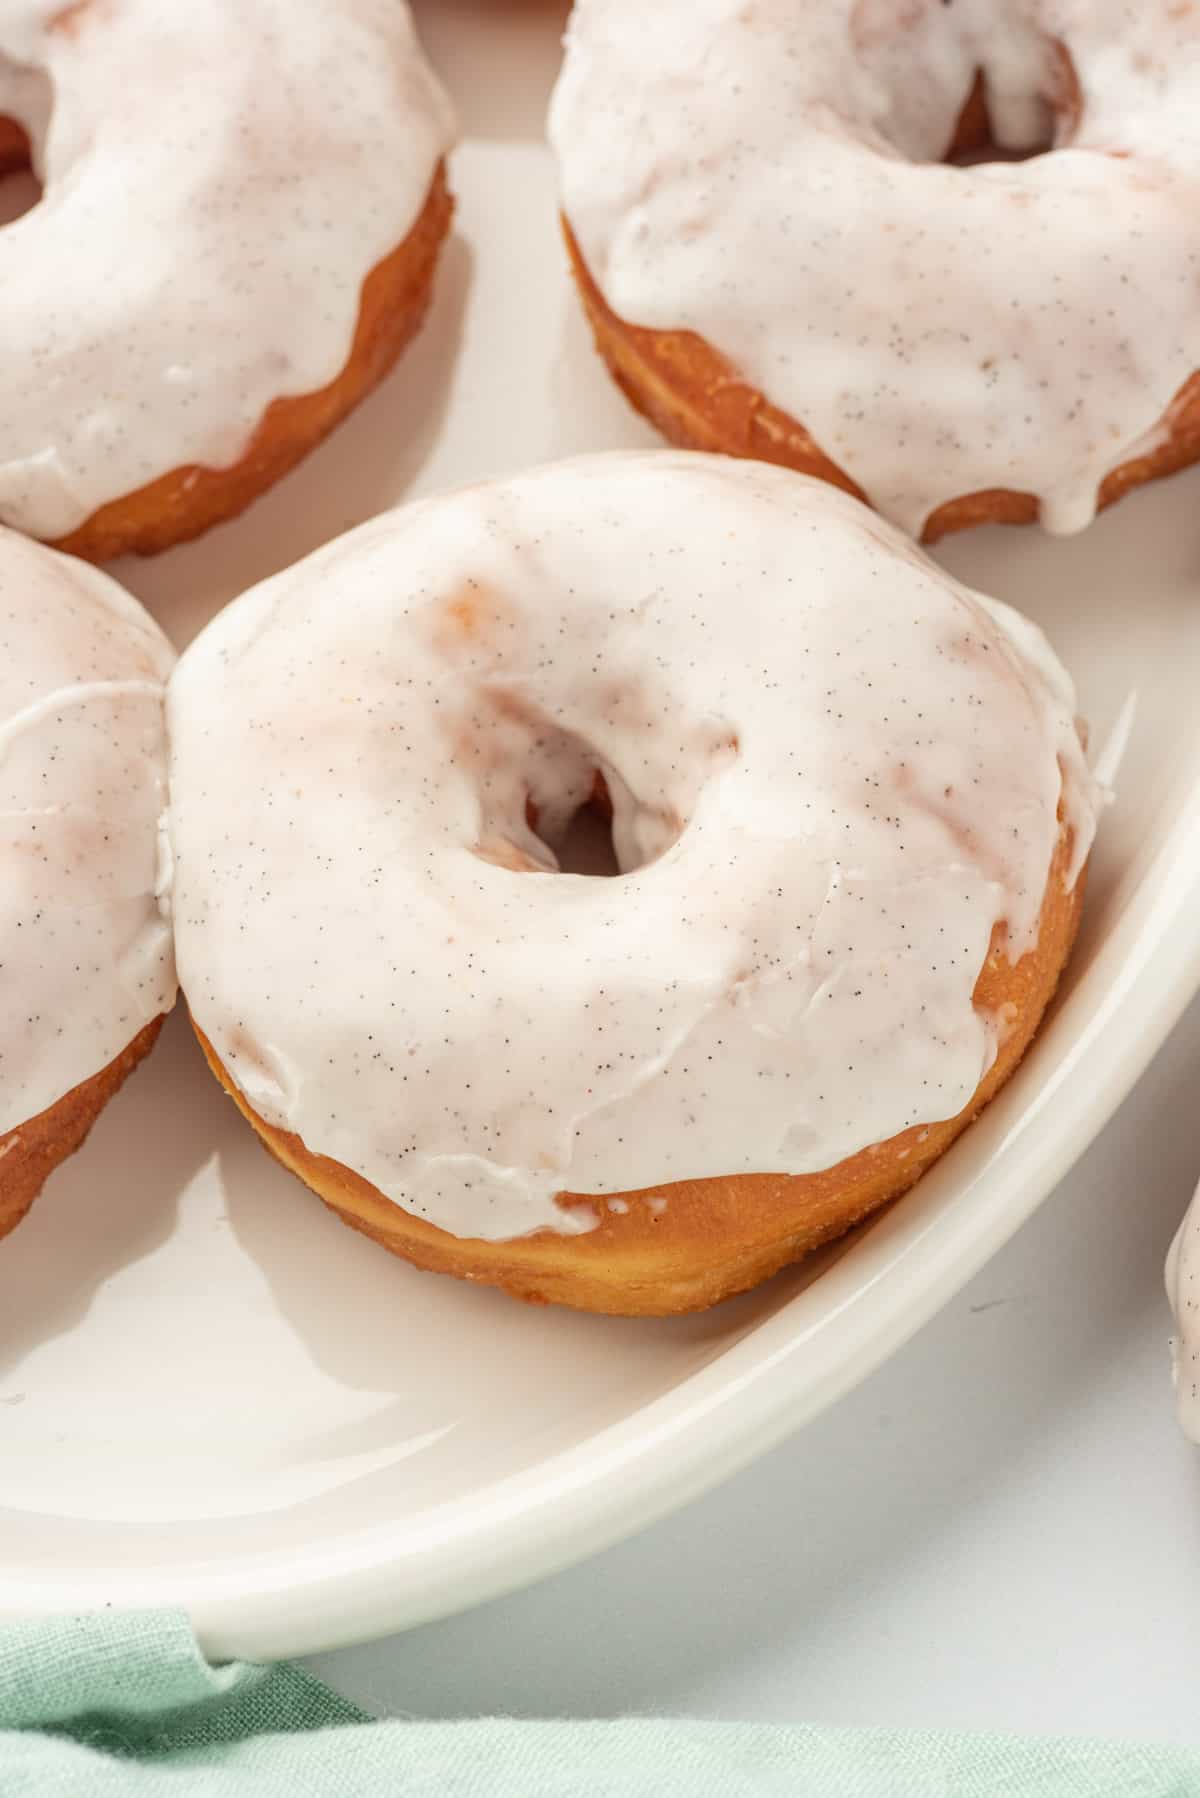 Several glazed donuts are placed on a white plate.